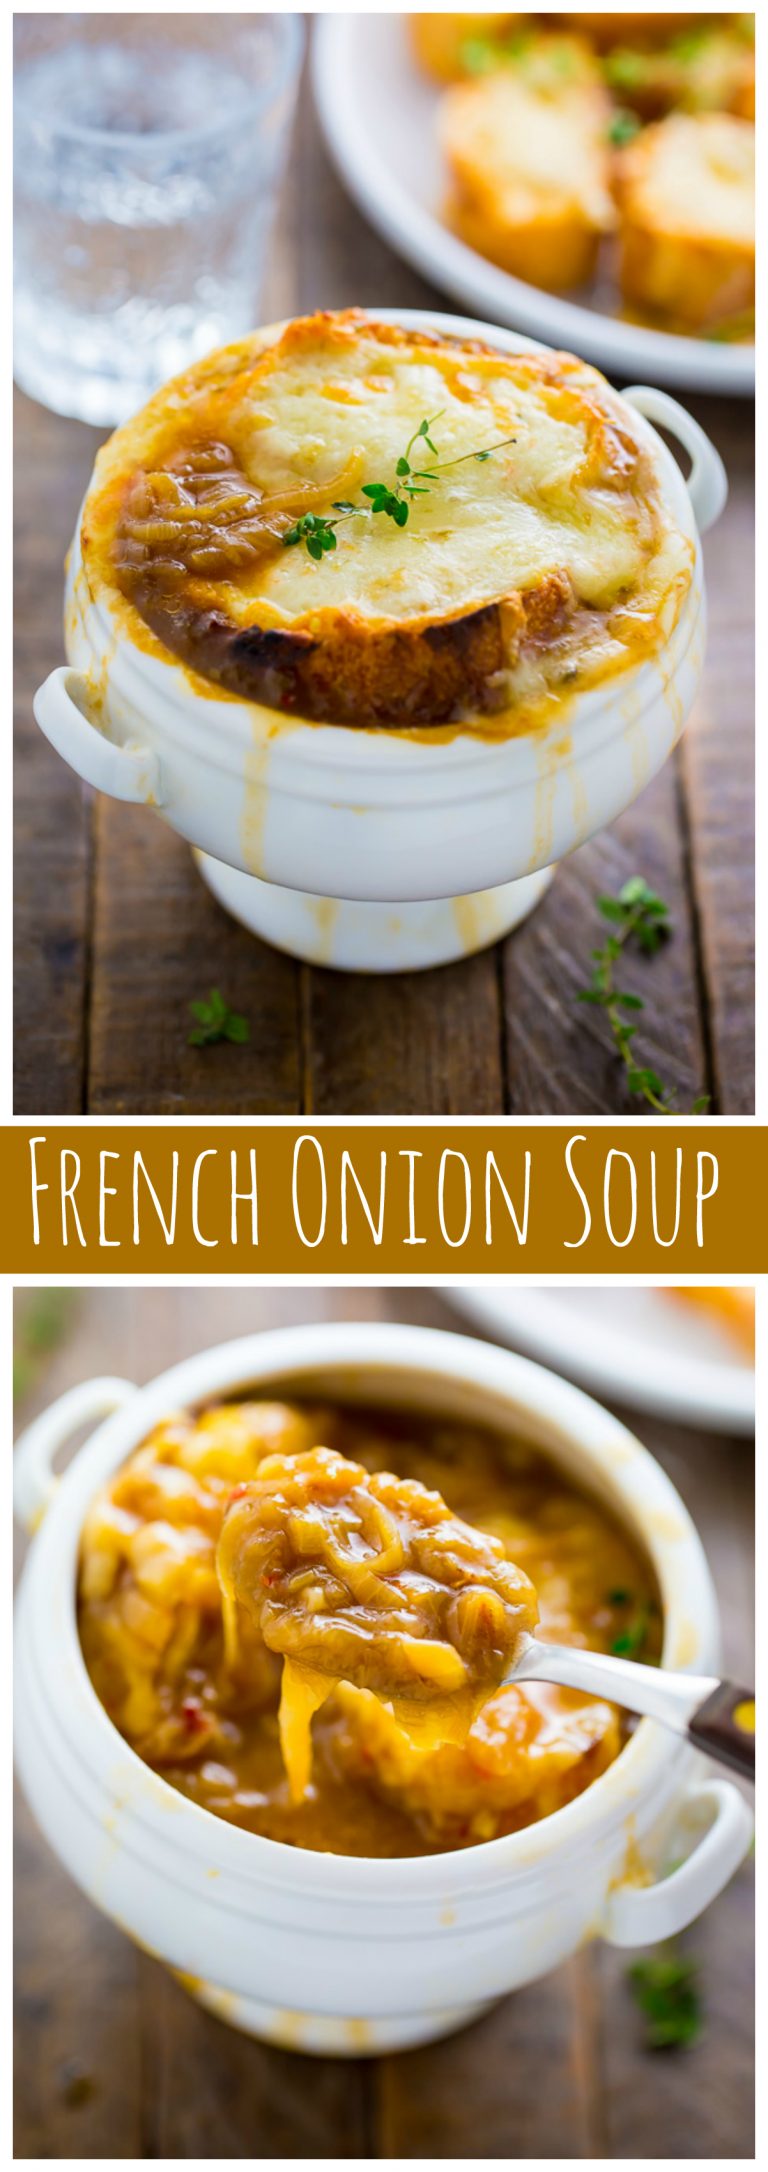 My Favorite French Onion Soup - Baker by Nature